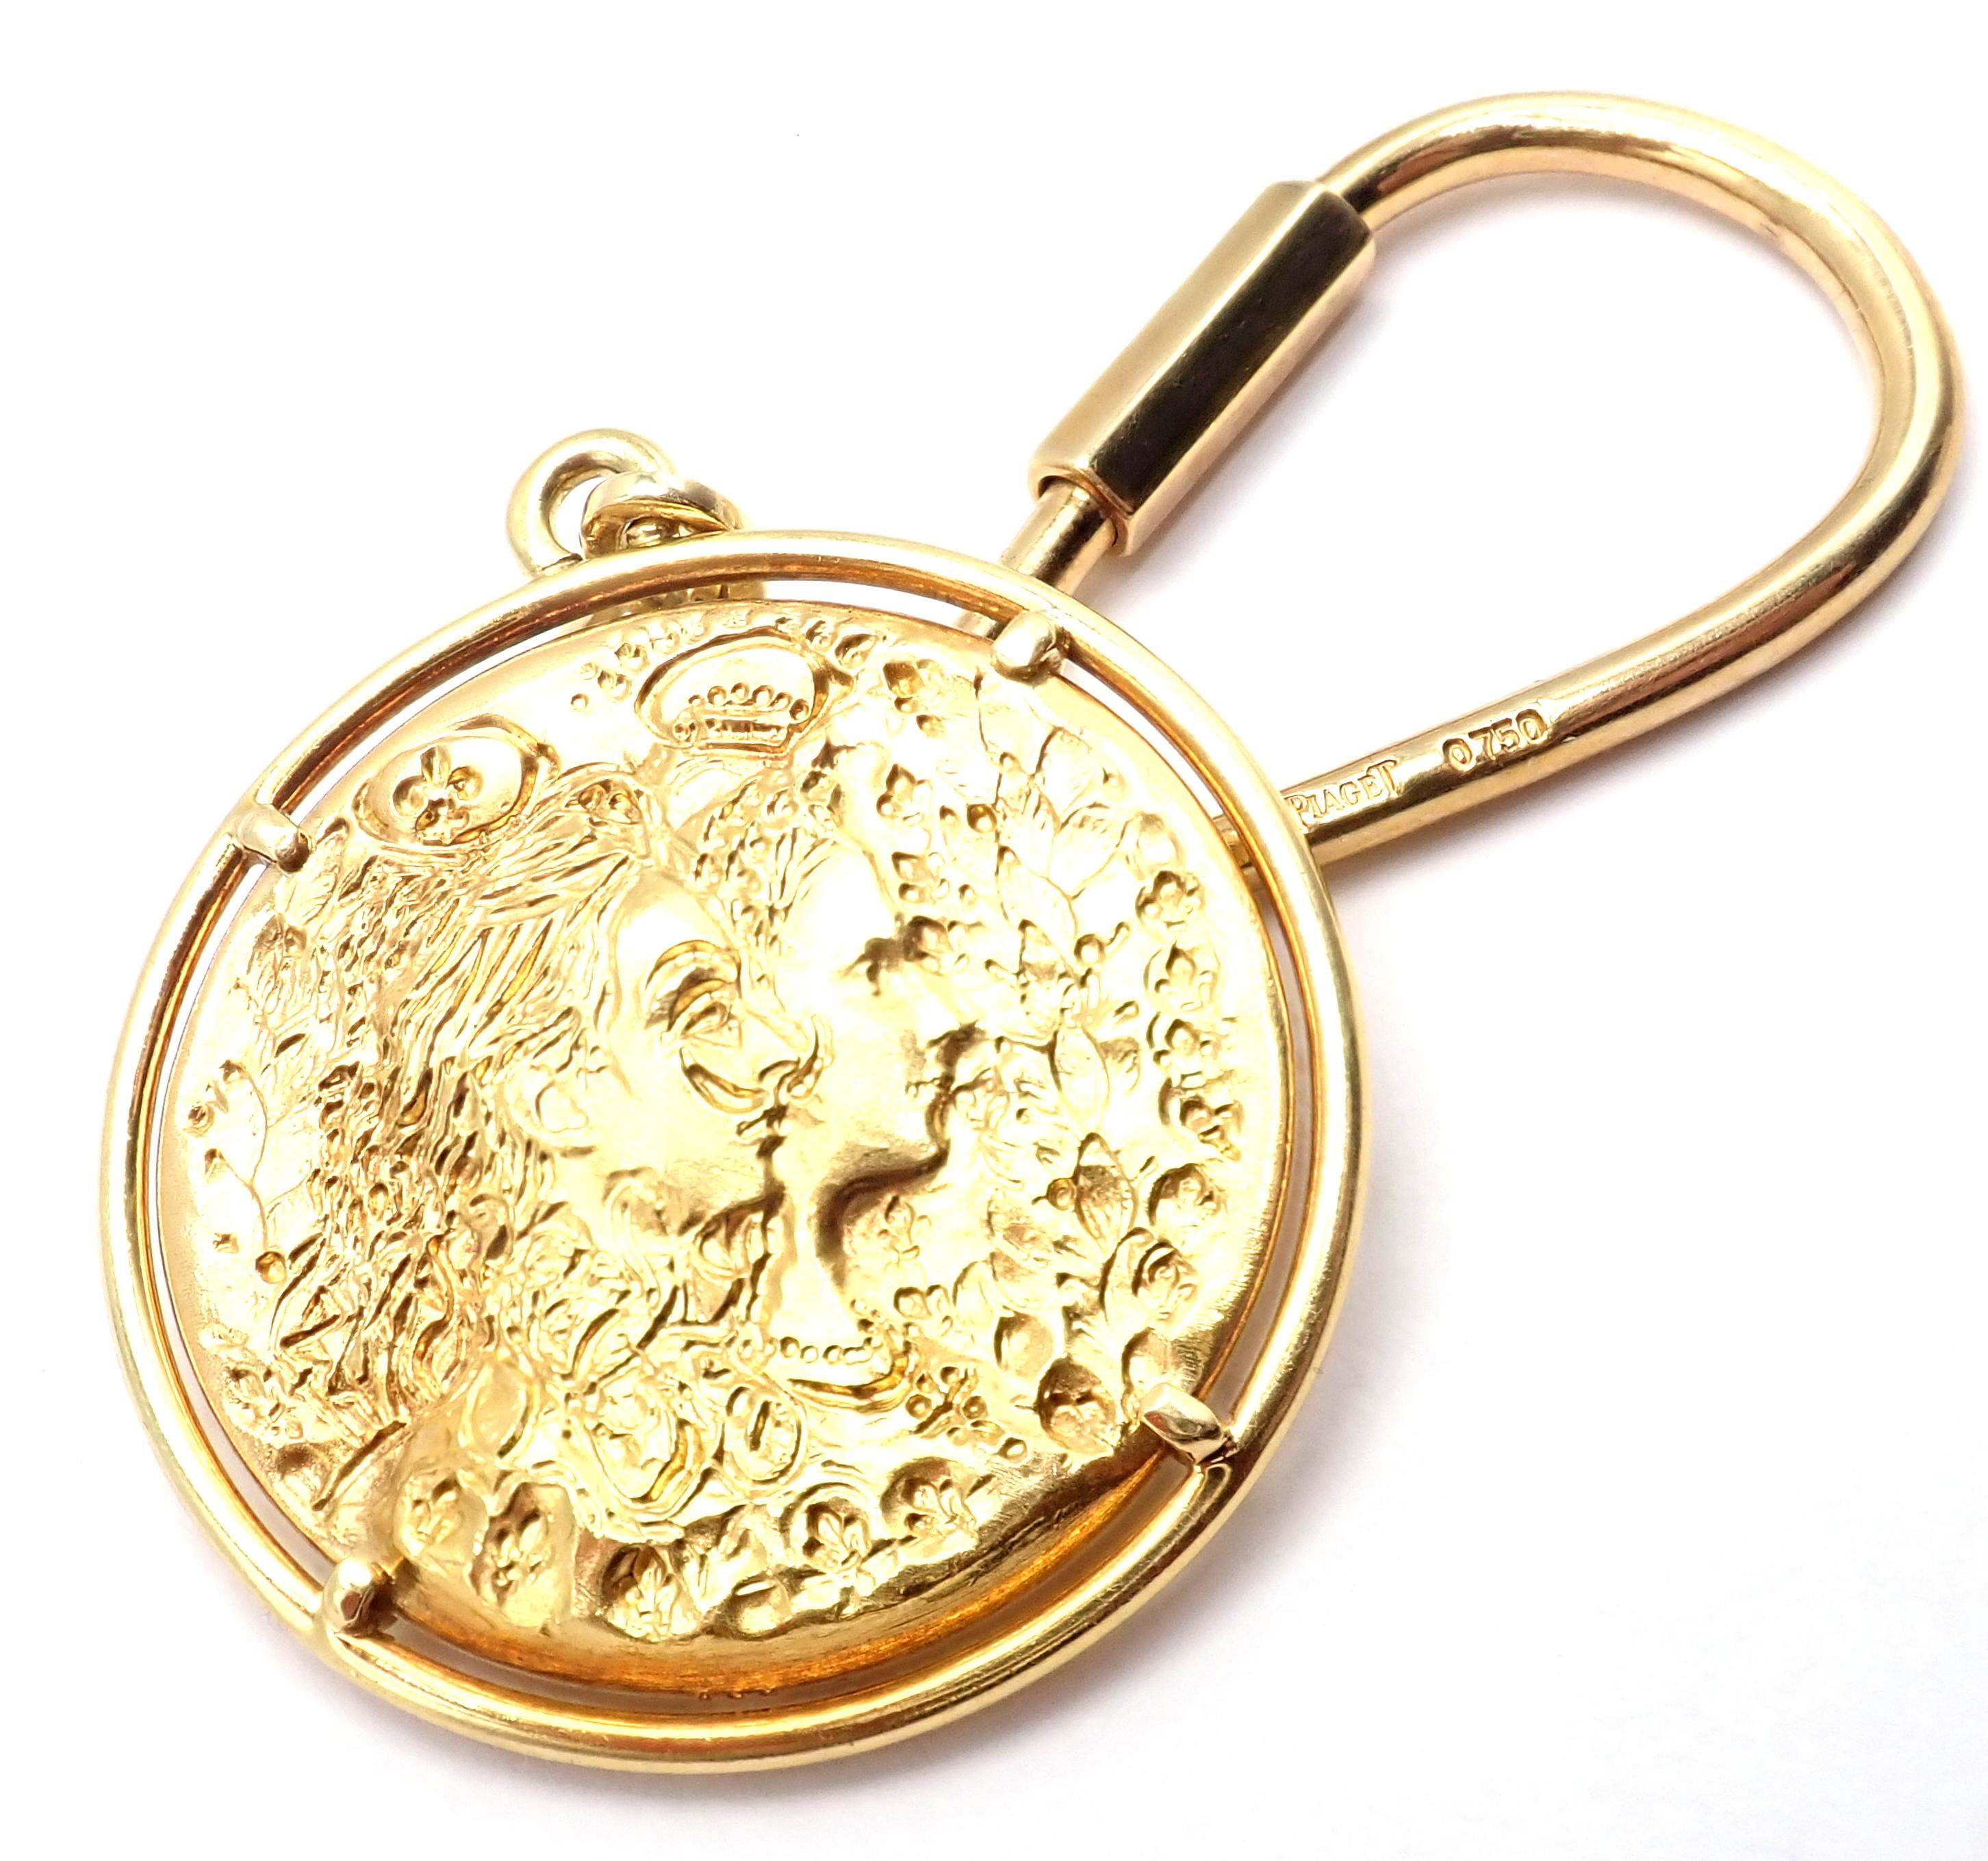 22k Yellow Gold Coin & 18k Yellow Gold Key Chain by Salvador Dali D'or for Piaget. 
An extremely rare 22k yellow gold coin key chain designed by the famous surrealist painter Salvador Dali. 
Inspired by his hero, Louis XIV, Dali minted a limited